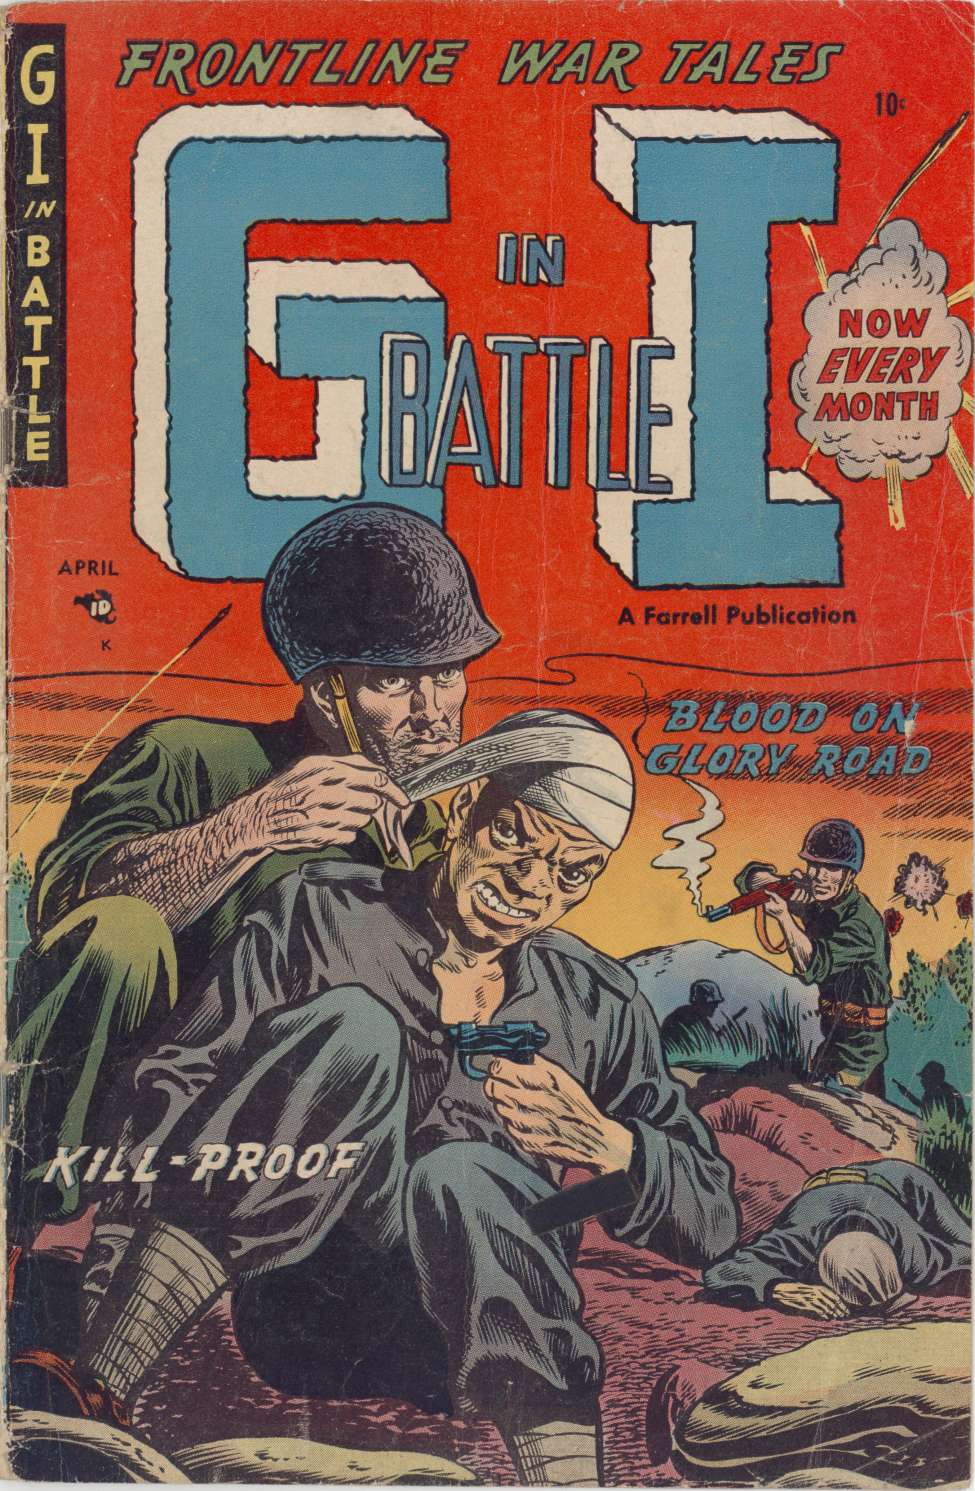 Comic Book Cover For G-I in Battle 7